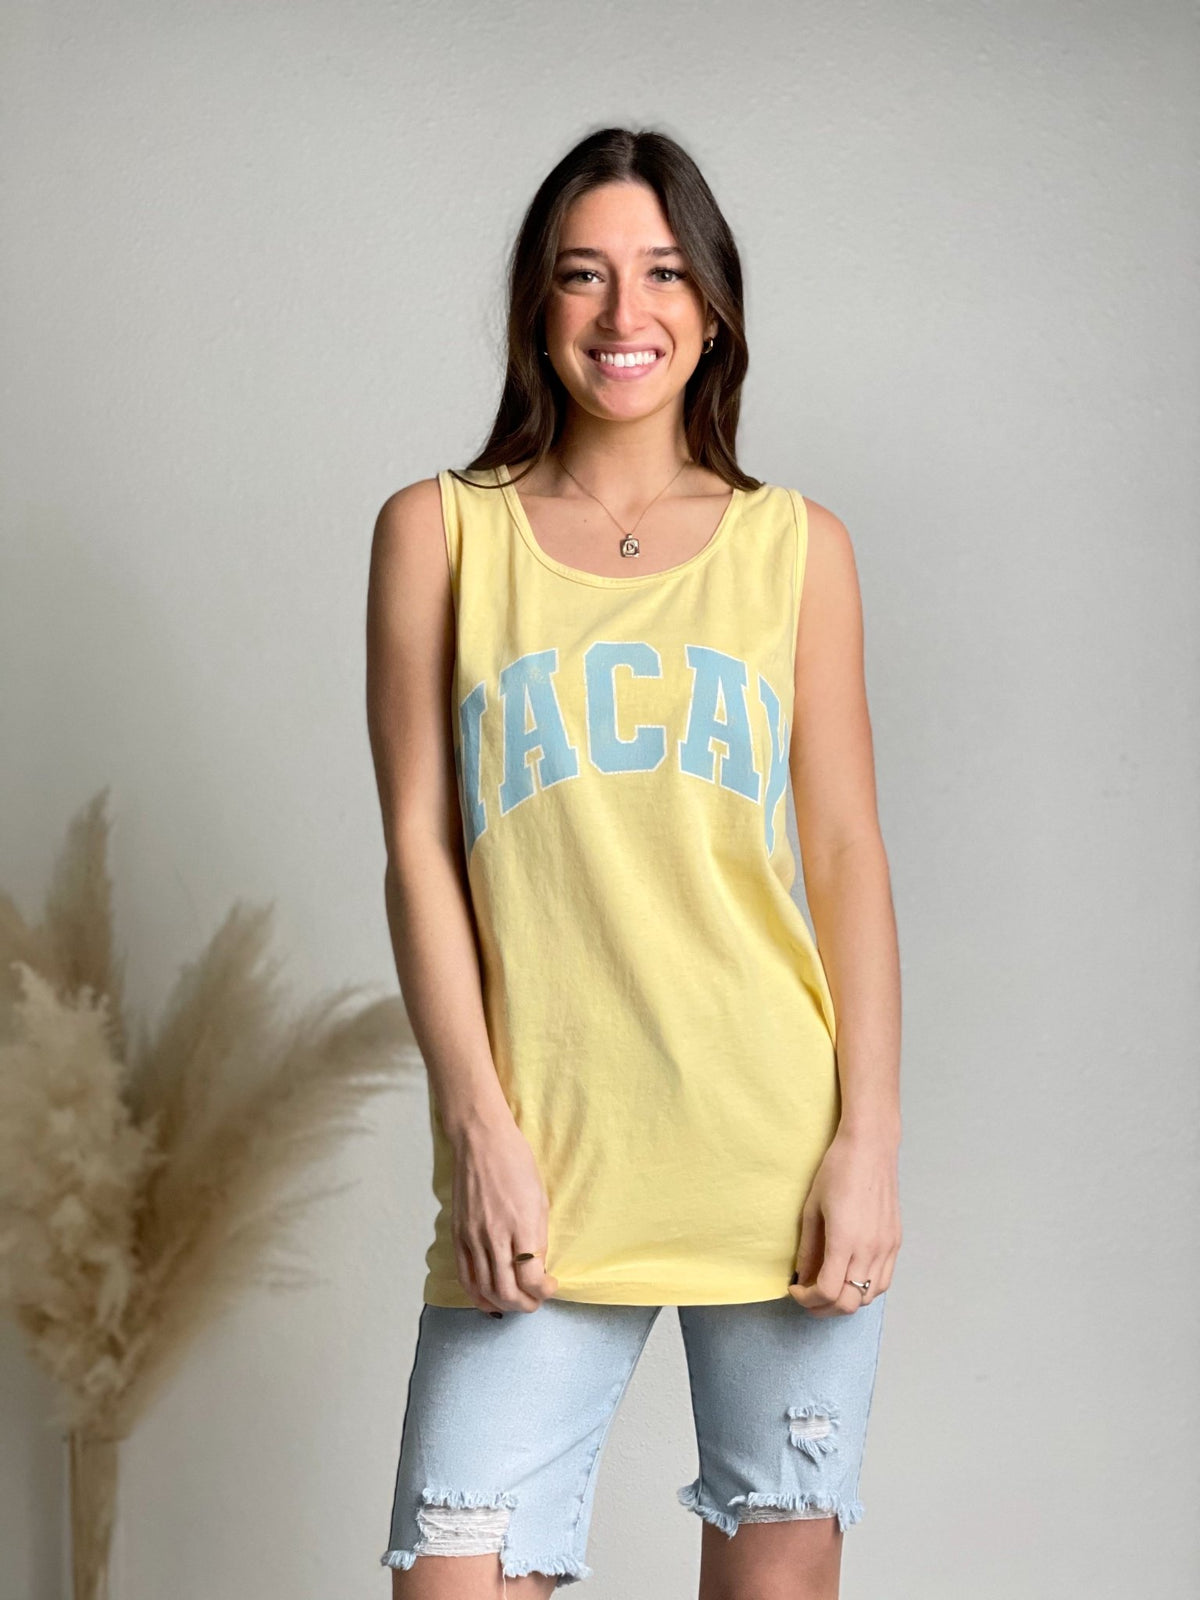 Vacay distressed tank top butter - Trendy Tank Top - Cute Vacation Collection at Lush Fashion Lounge Boutique in Oklahoma City